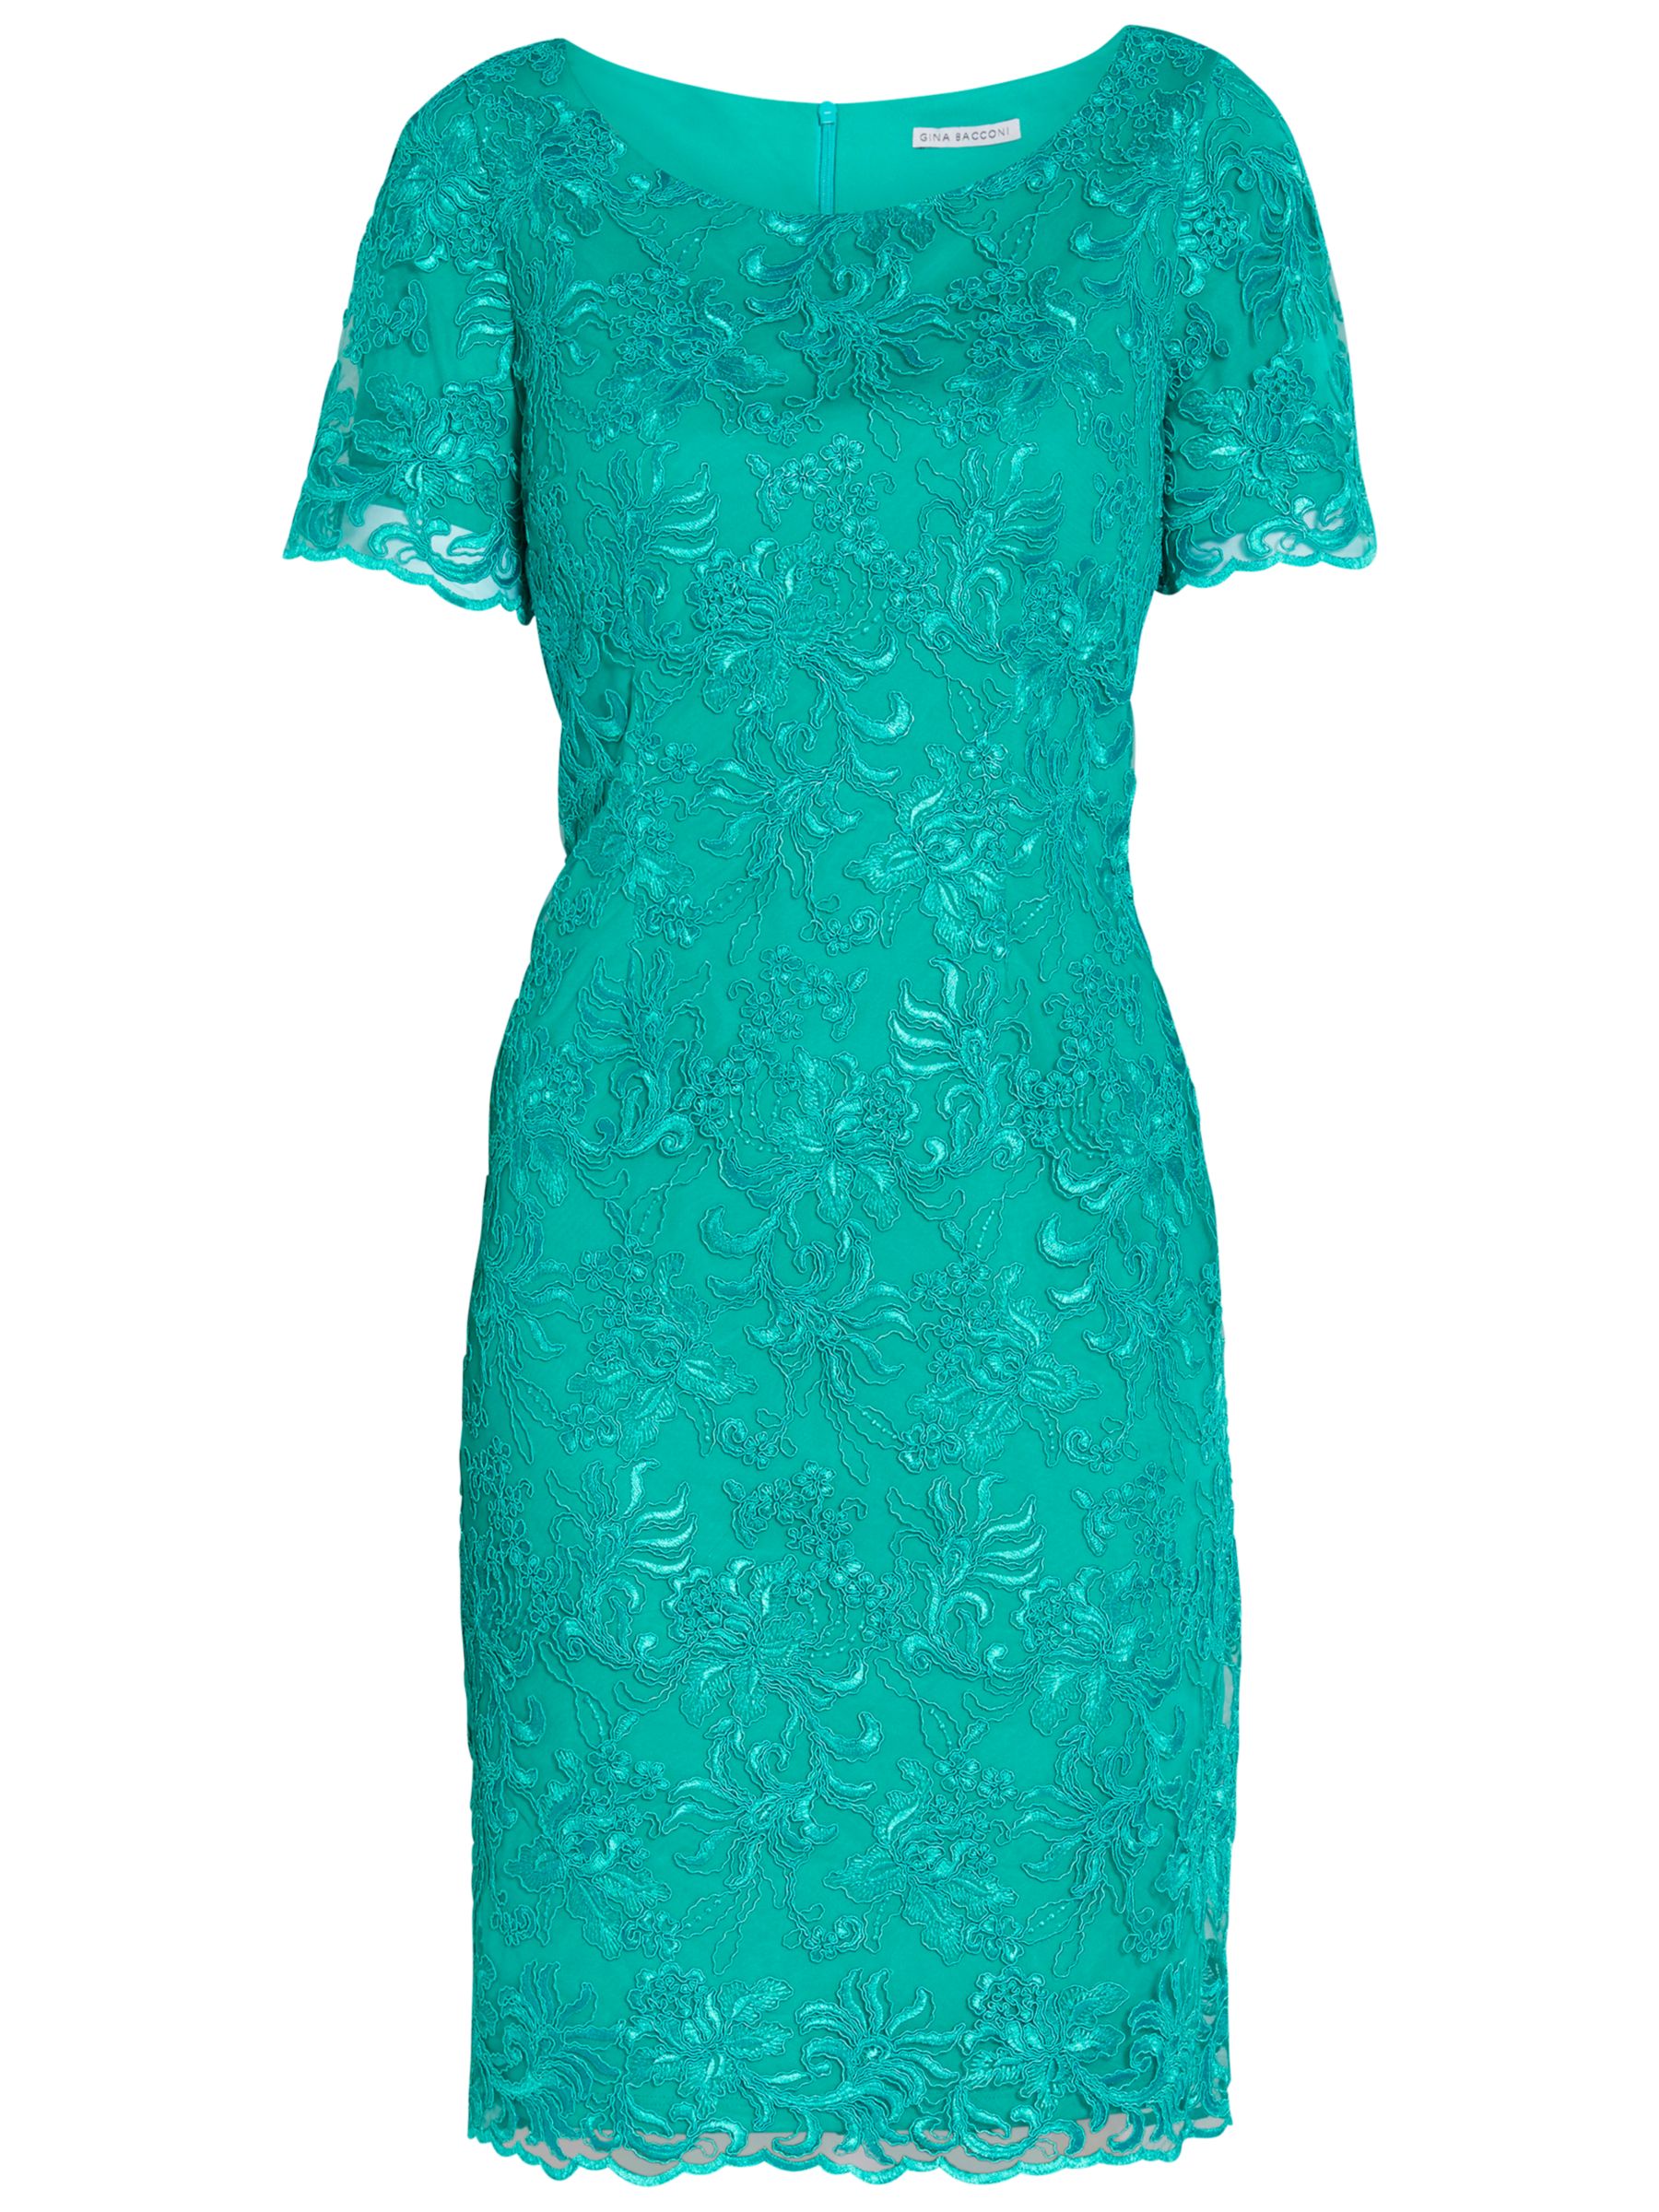 Gina Bacconi Embroidered Corded Dress, Summer Green, 24